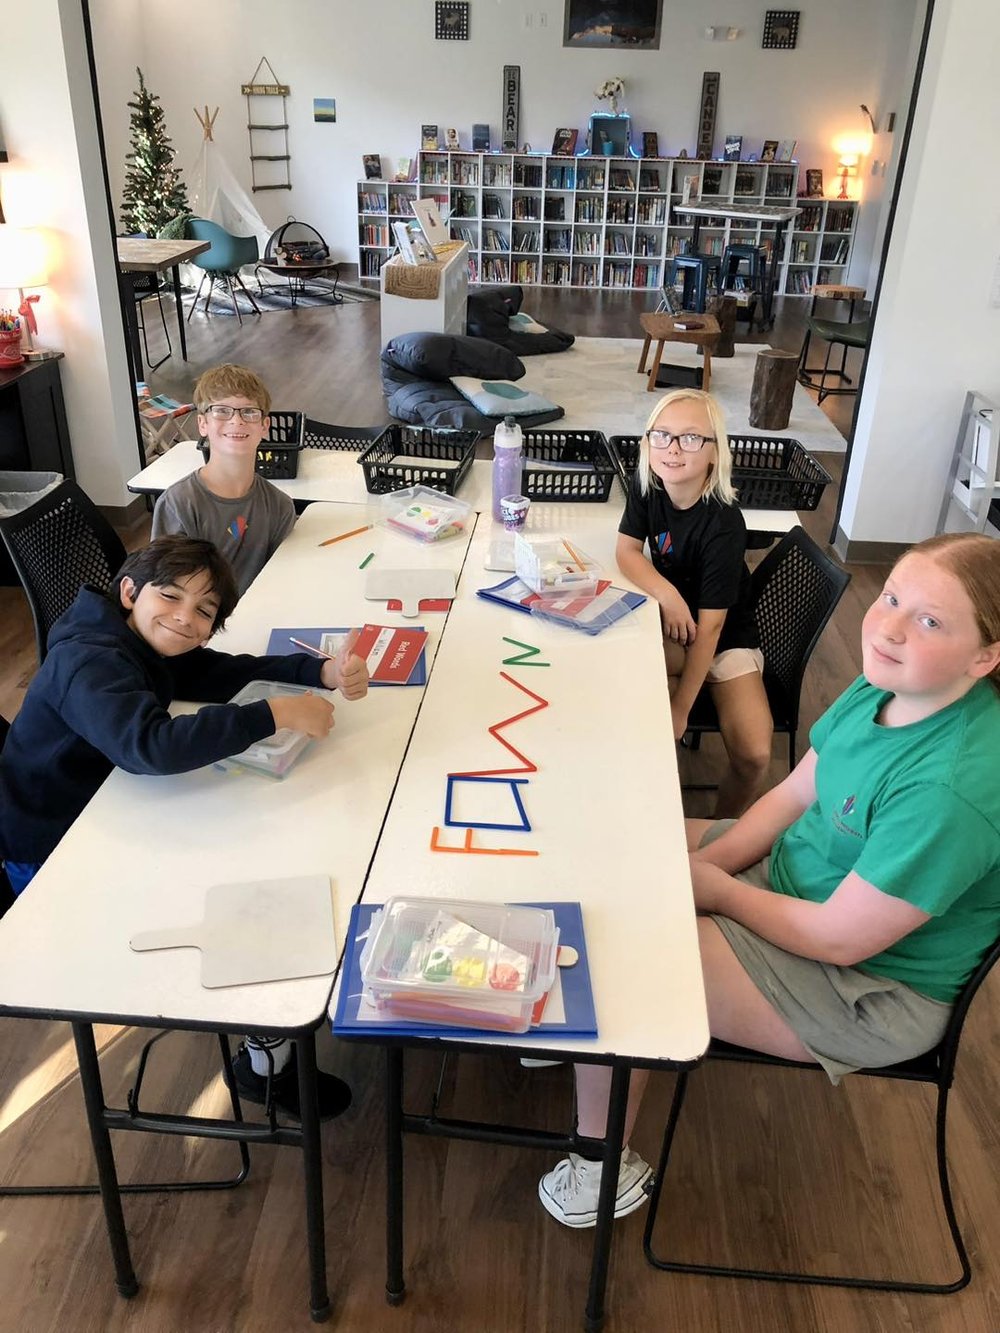 Students with Learning Disabilities such as Dyslexia experience Multisensory lessons for reading through Structured Literacy - Orton-Gillingham Approach at Educational Pathways Academy, Private School for Dyslexia in Florida.jpg